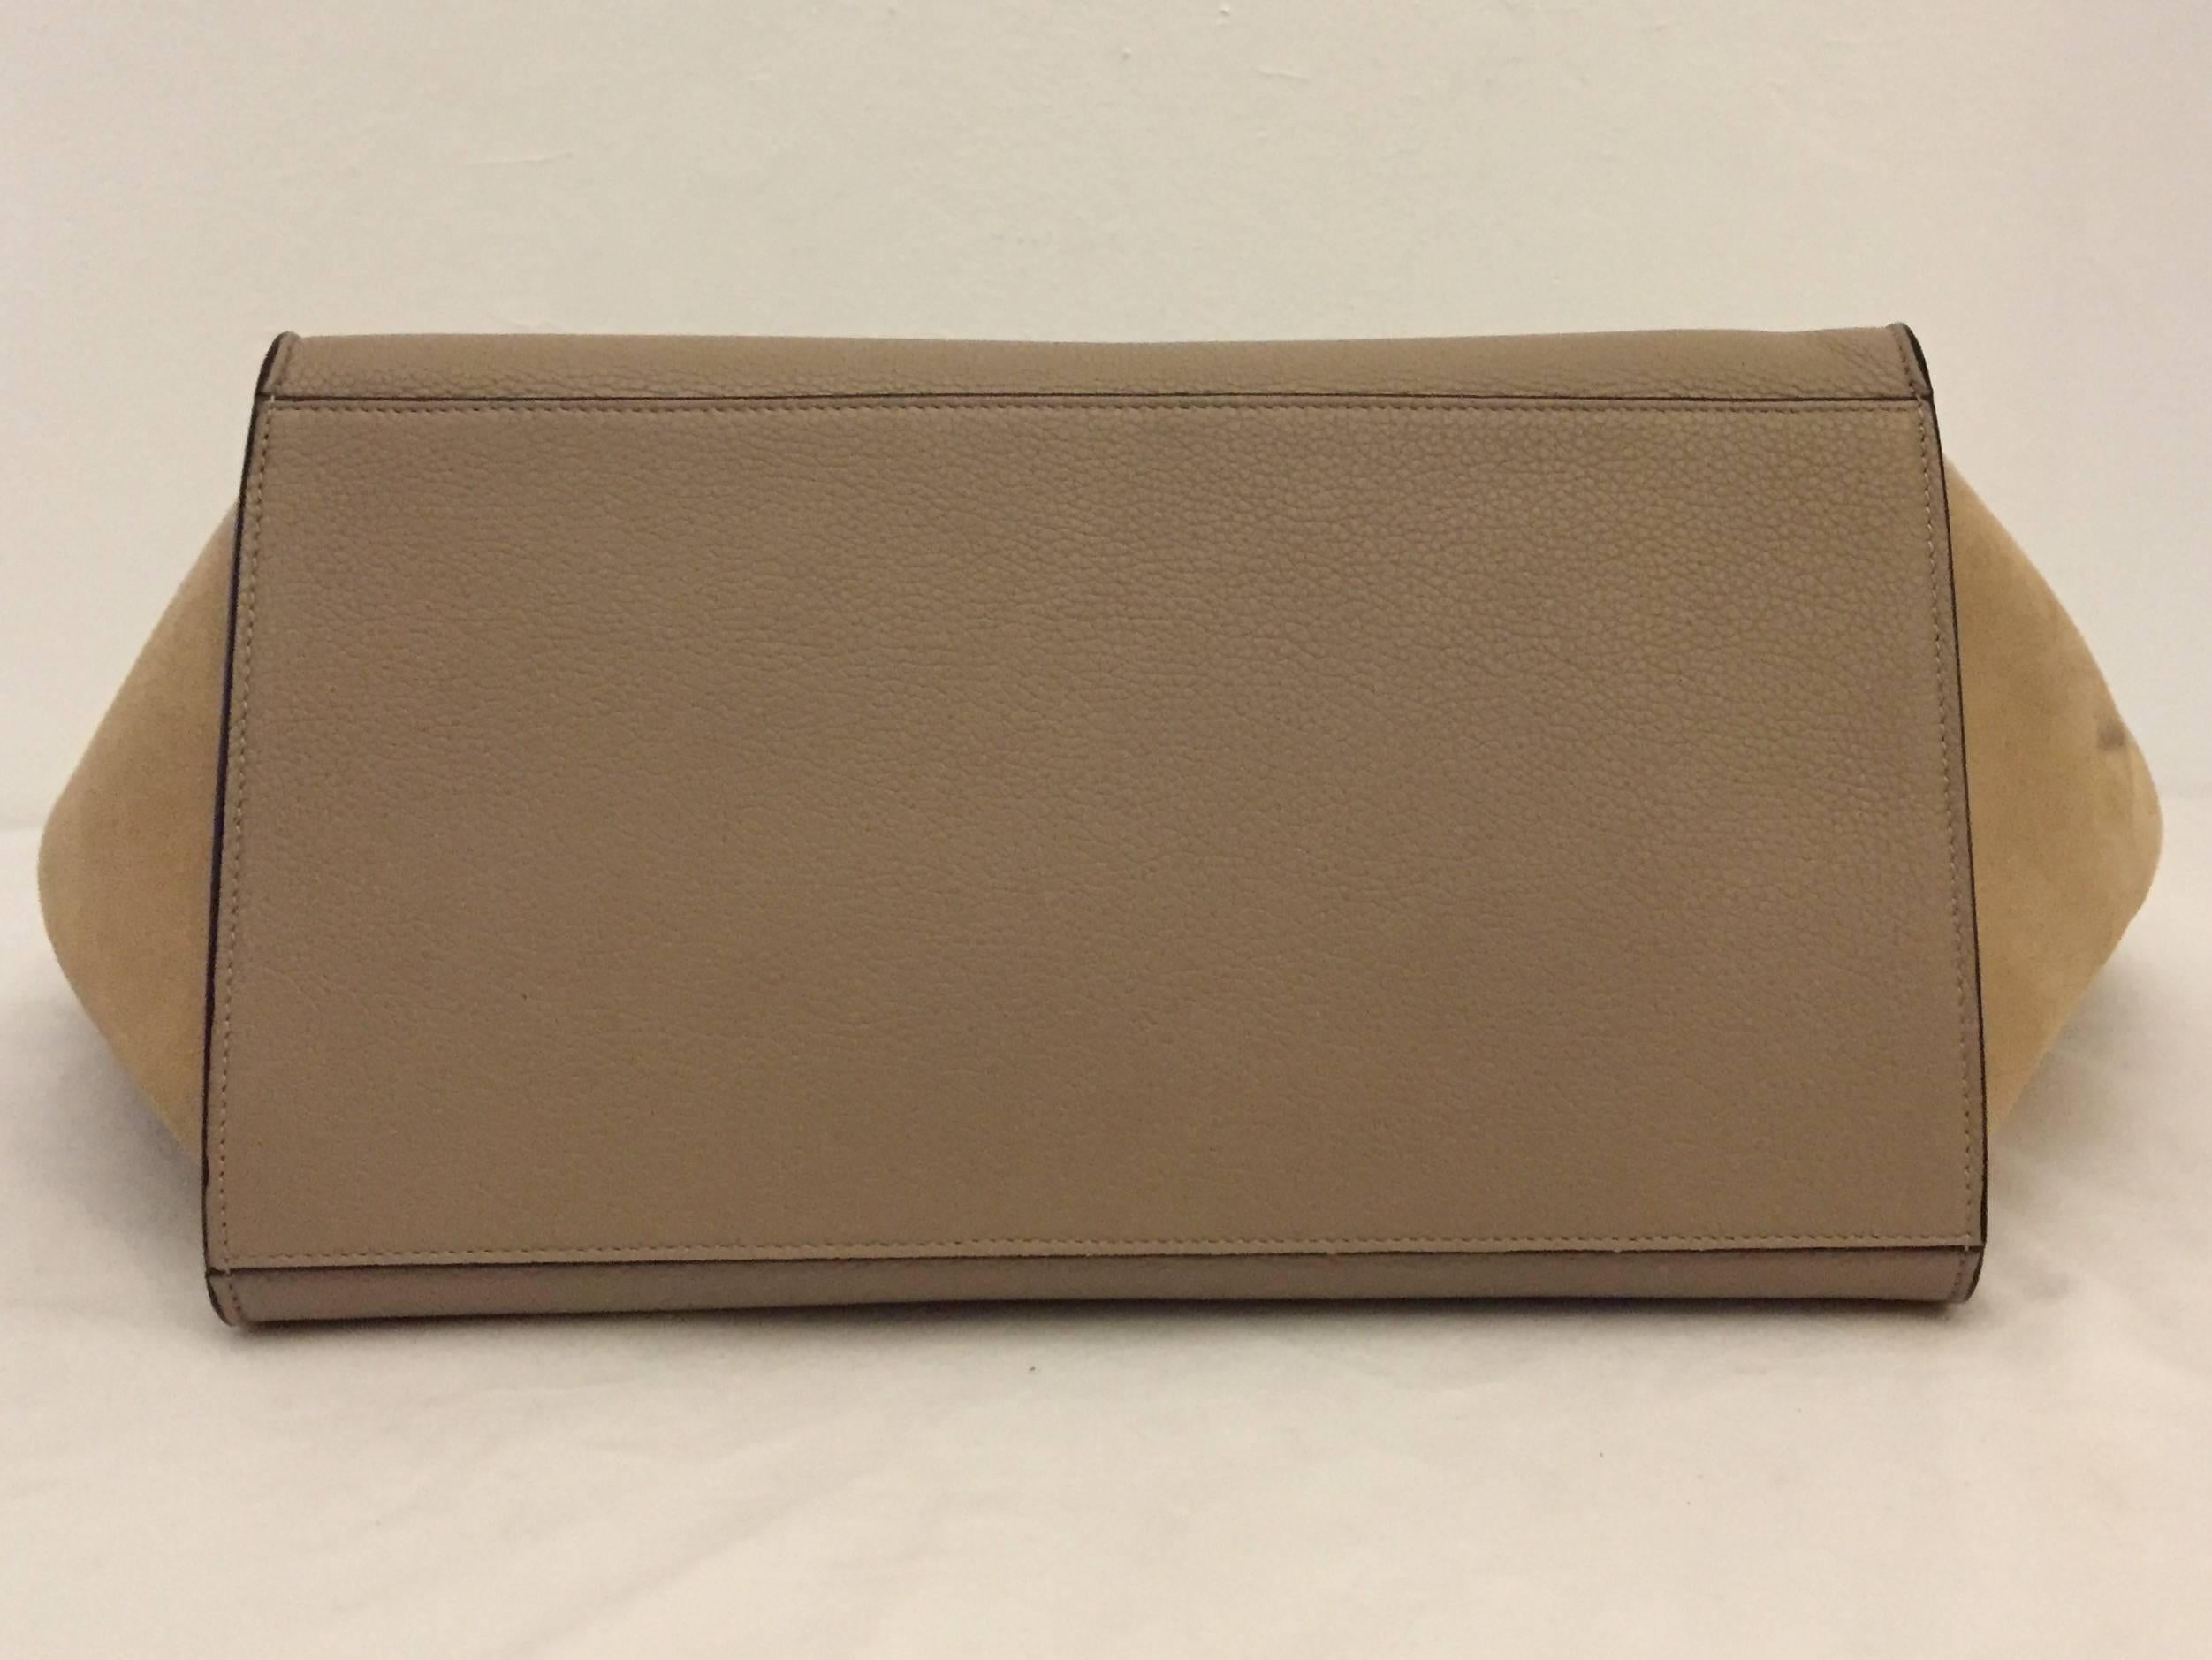 Women's Coveted Celine Taupe Leather Trapeze Medium Bag